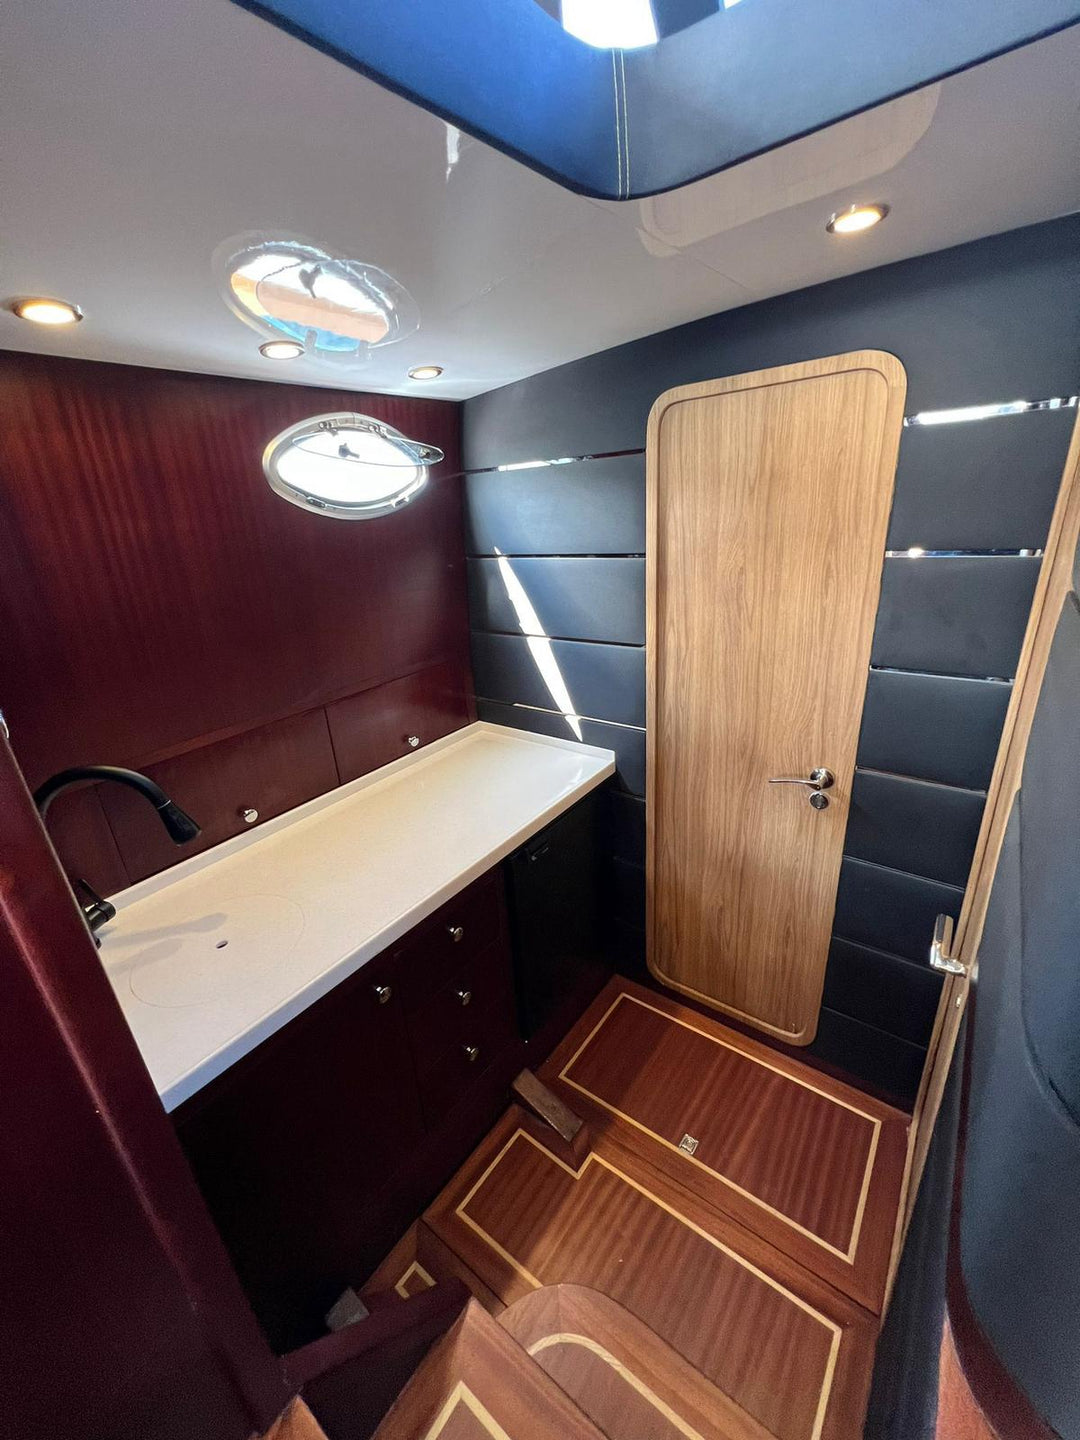 Modern and clean WC facilities available on LUXURY KDR1, enhancing the comfort of guests during their luxury journey.